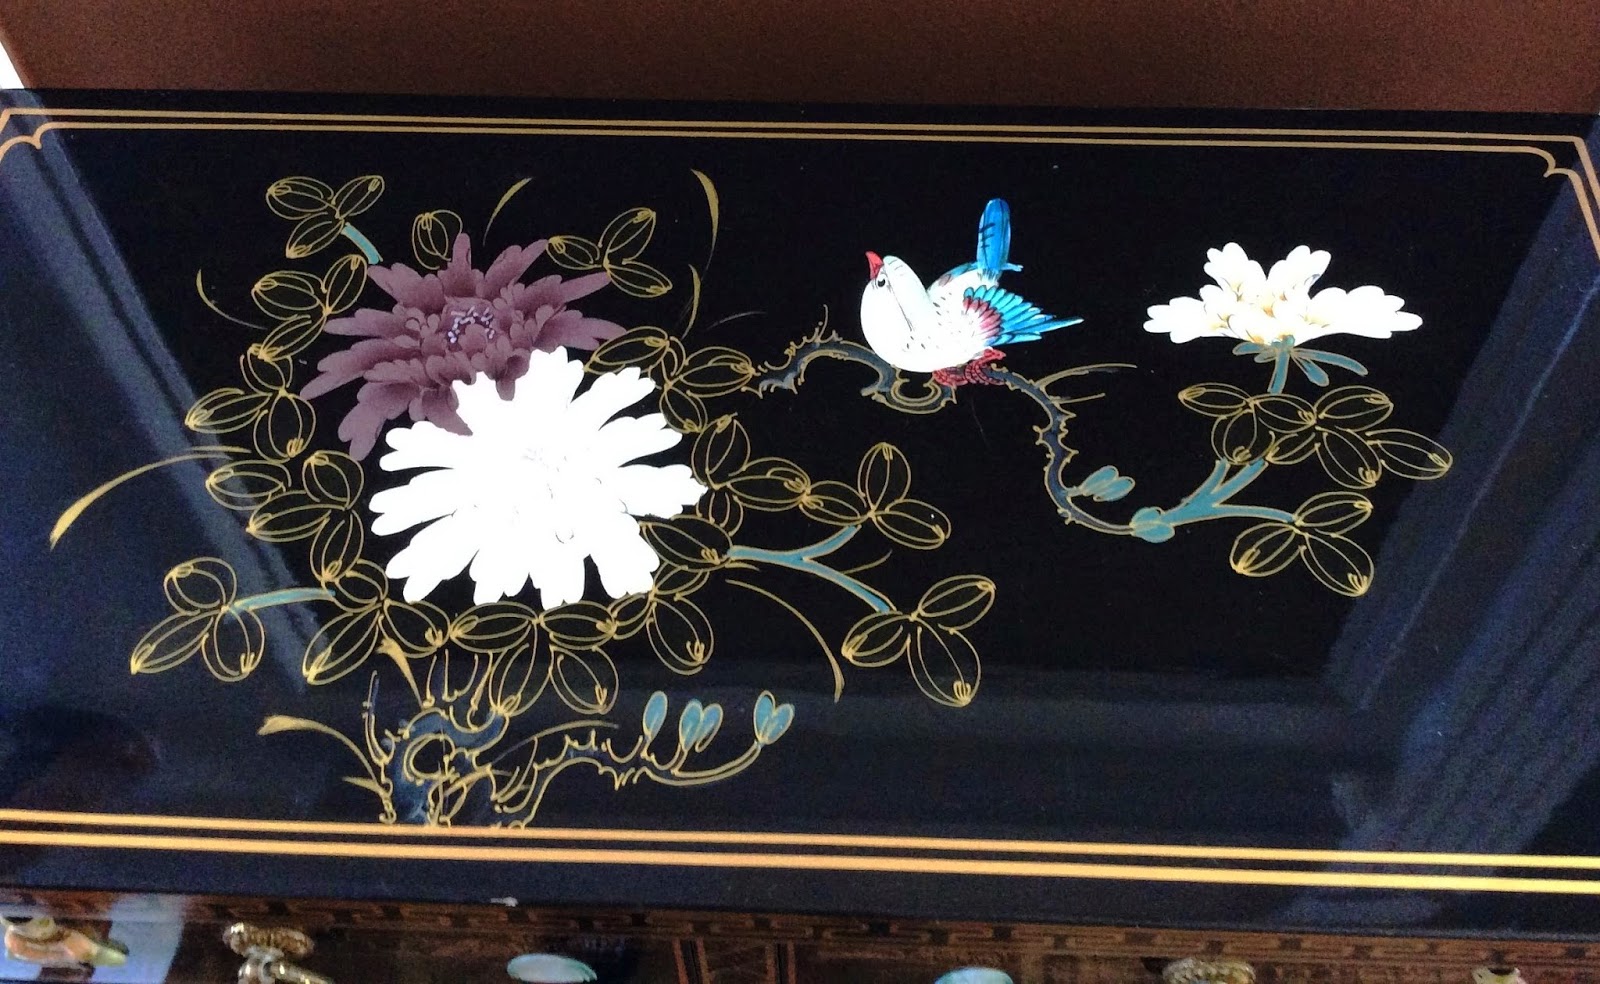 Craigslist Chinoiserie Find - East Meets South